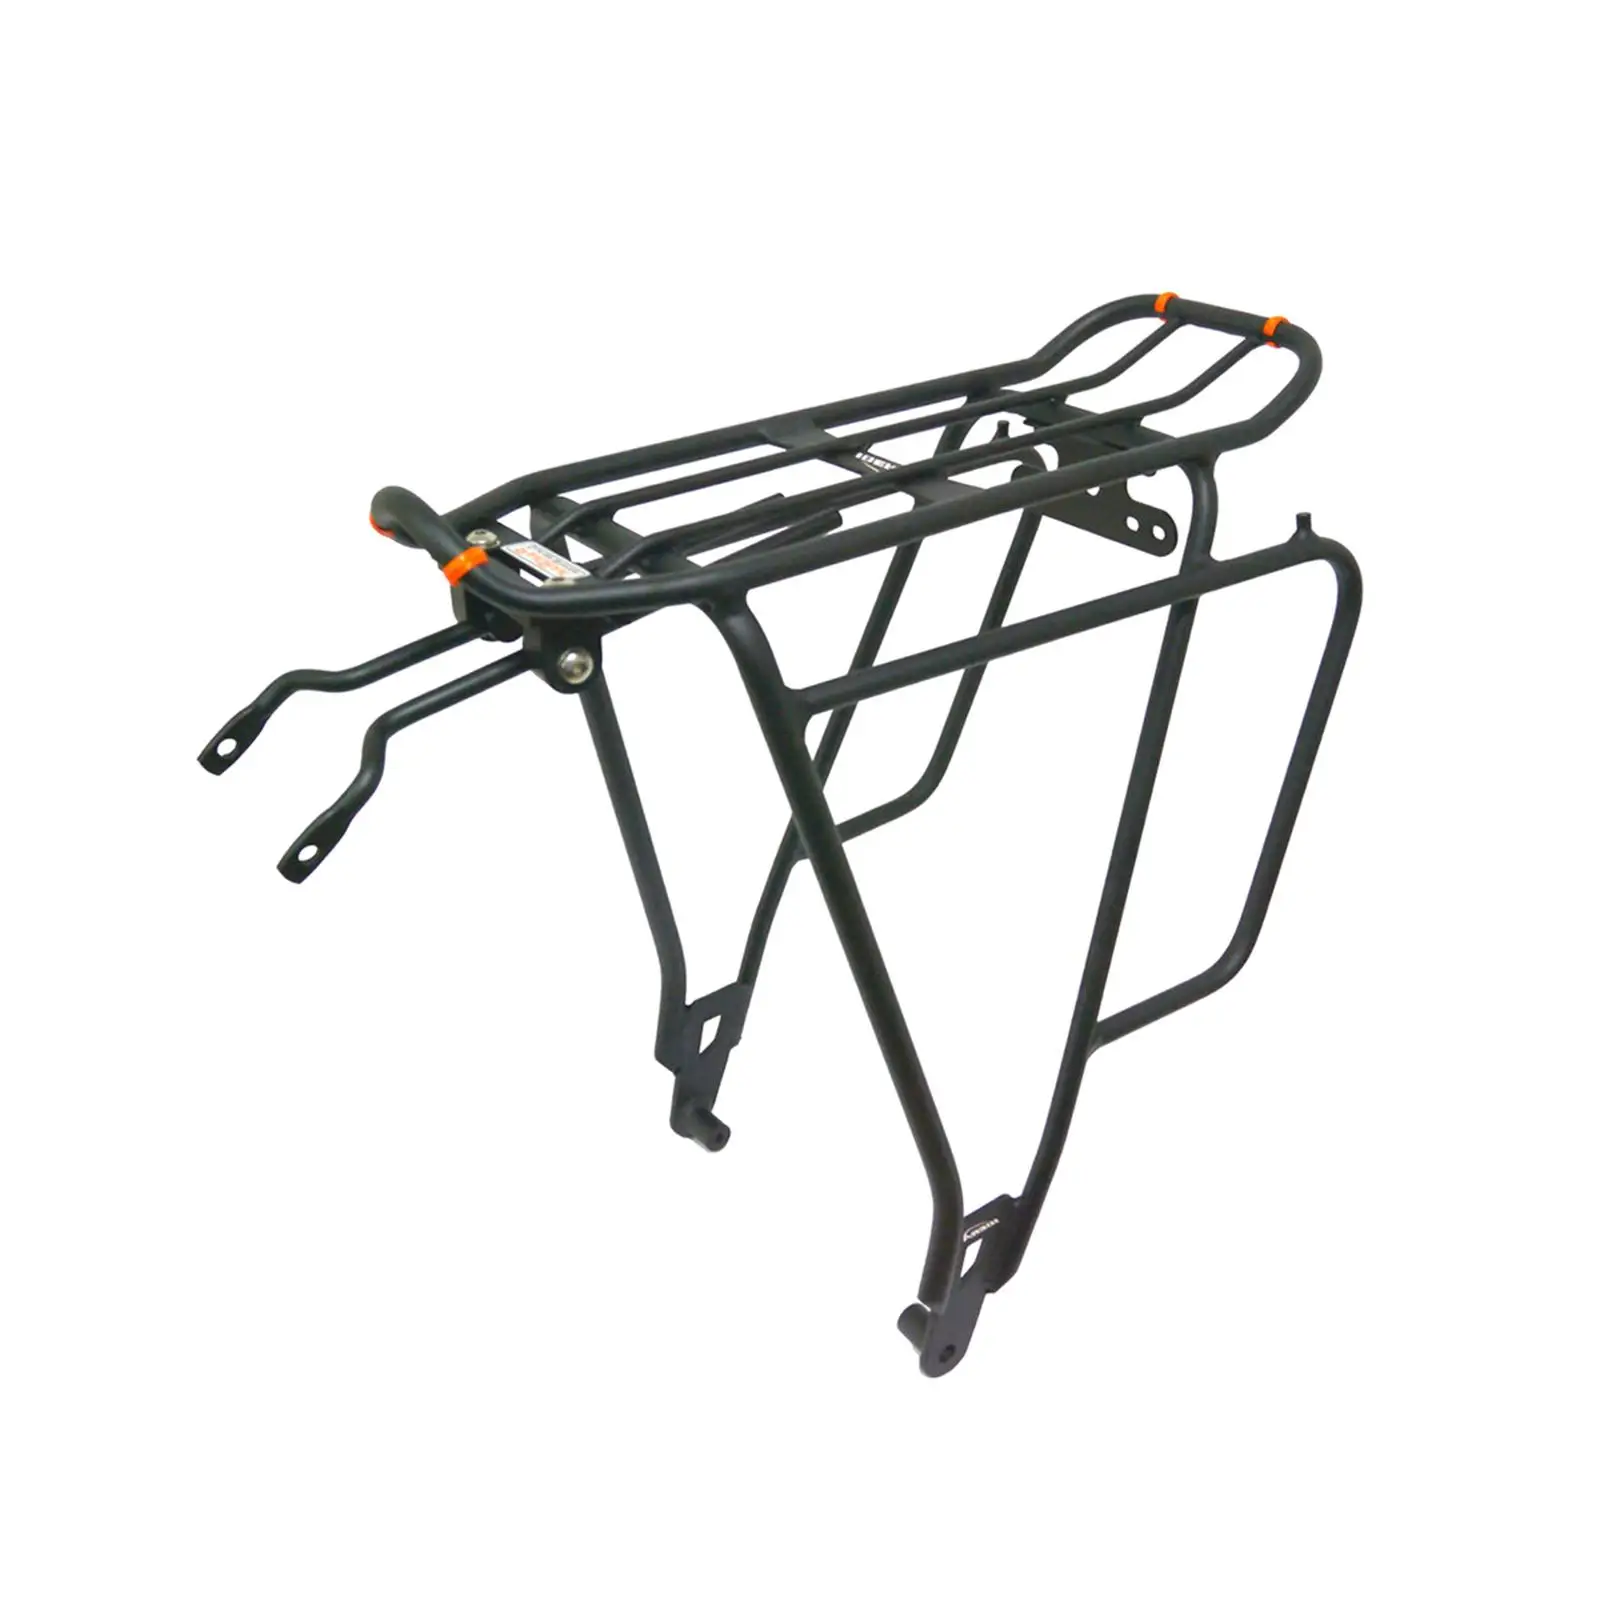 Rear Bike Rack Tailstock Holder Cycling Equipment Bicycle Luggage Carrier Rack for Outdoor Cycling Road Bike Travel Biking